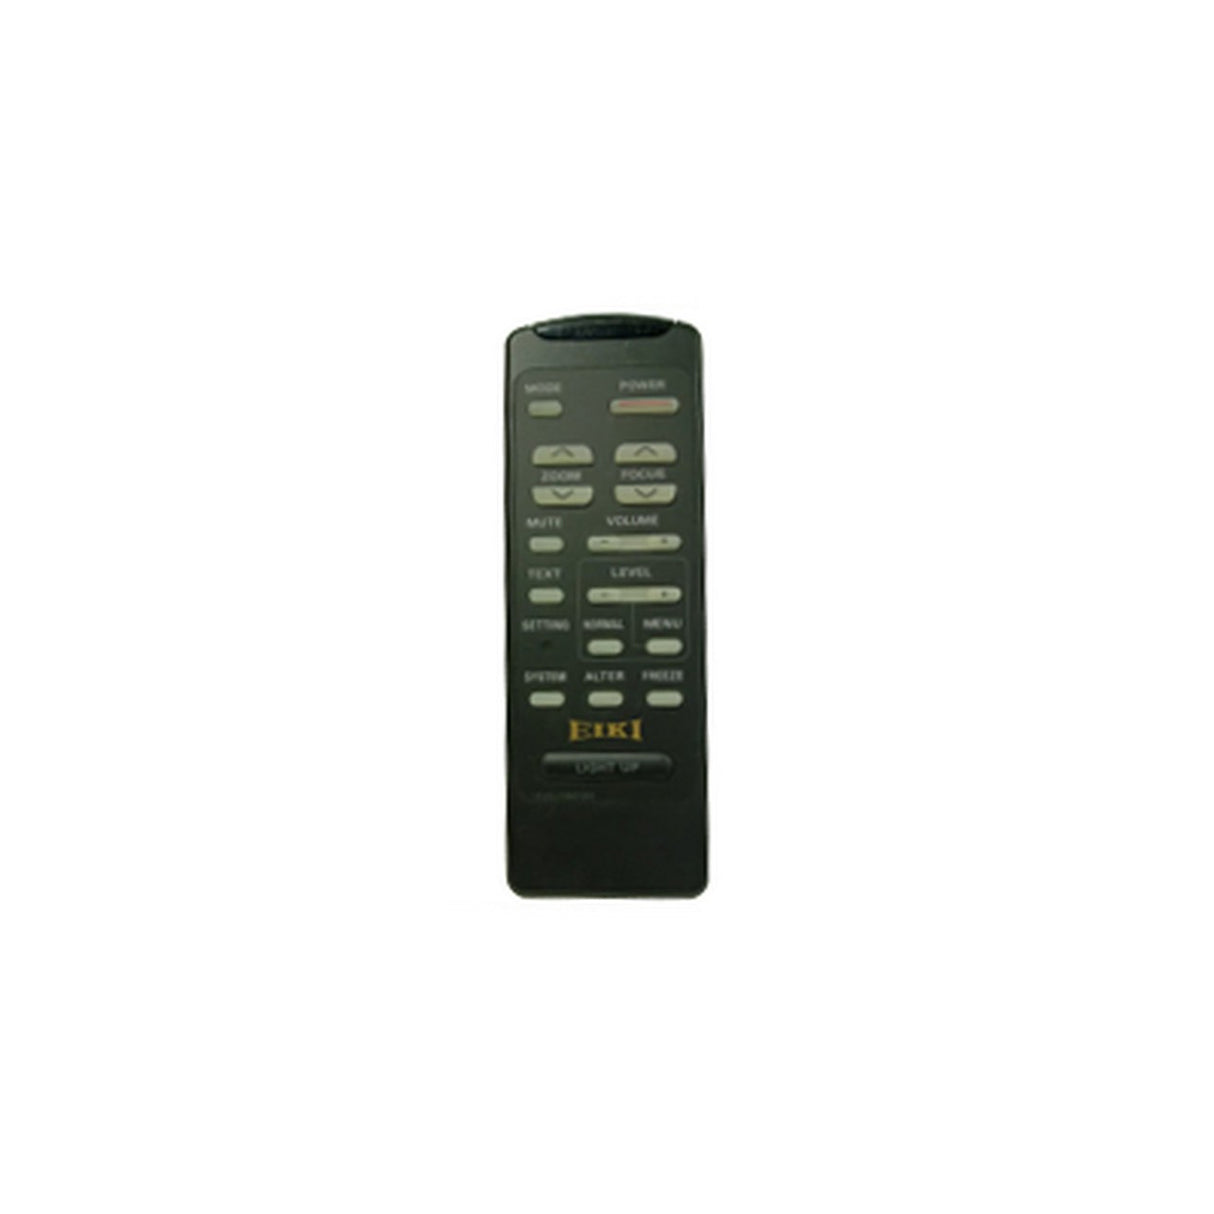 Eiki 645 011 9873 | Infrared Wired Projector Remote for LC-6200 LC-6210 LC-6000 LC-6000UL